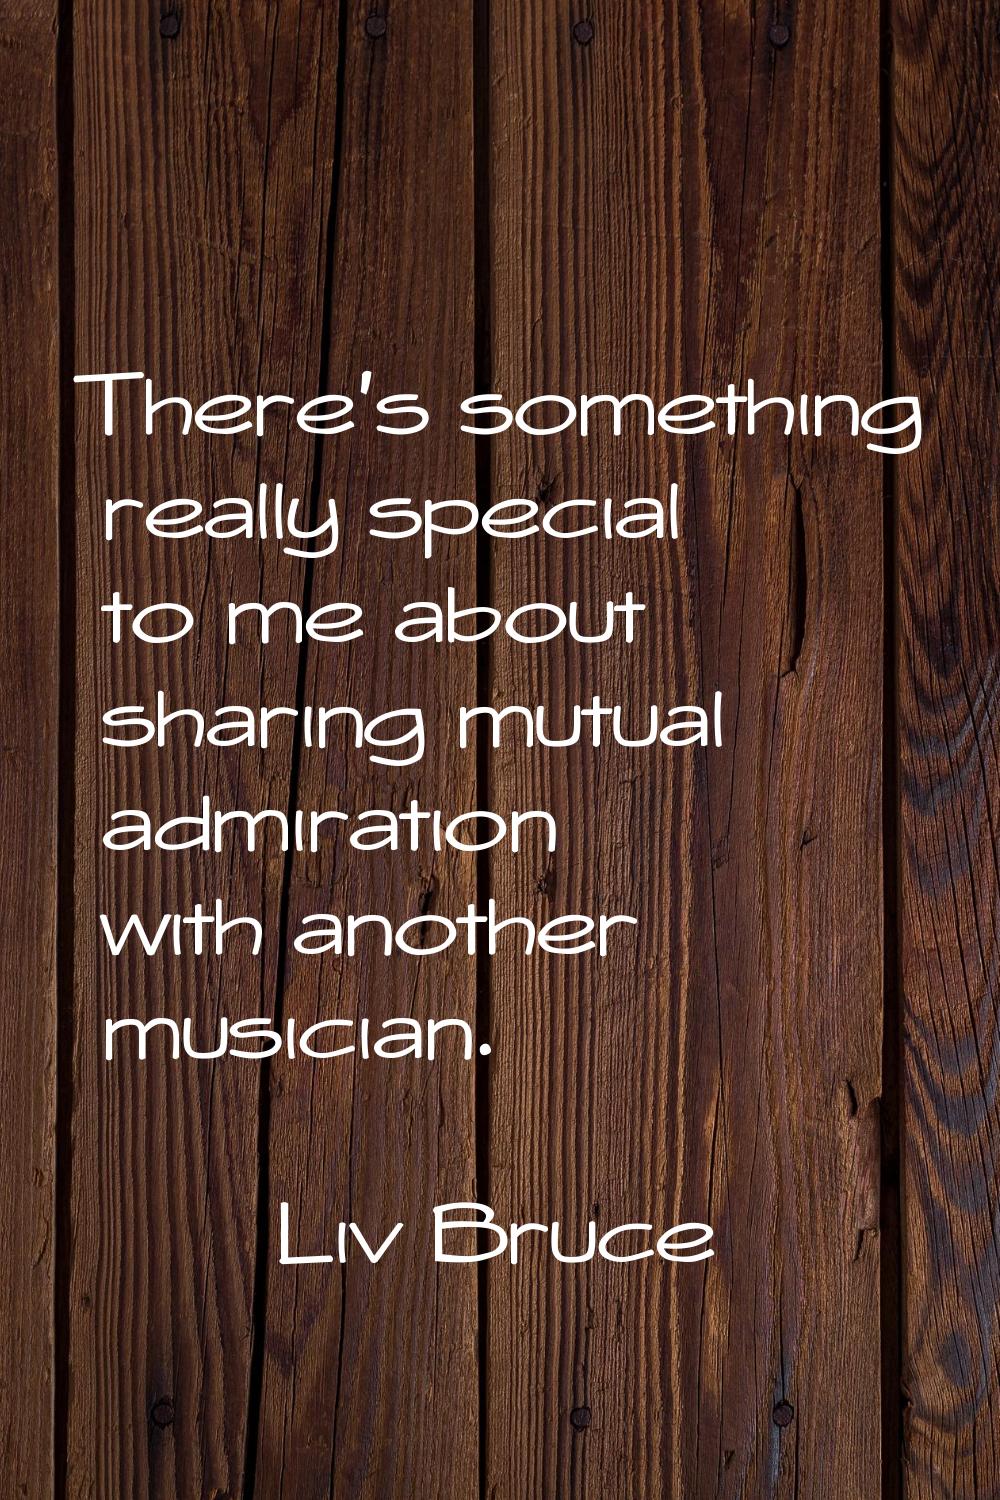 There's something really special to me about sharing mutual admiration with another musician.